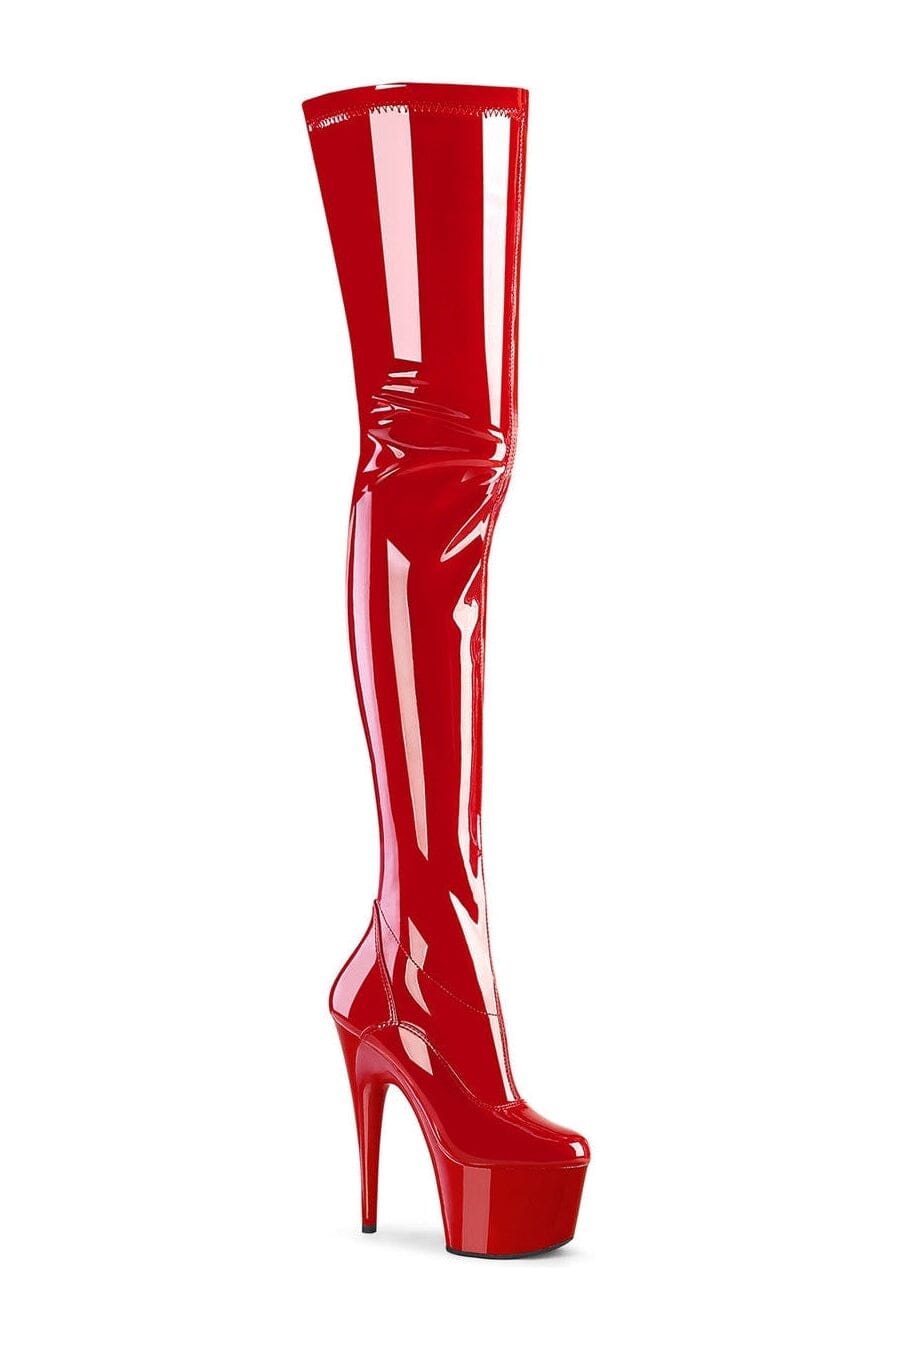 ADORE-4000 Red Patent Ankle Boot-Ankle Boots-Pleaser-Red-10-Patent-SEXYSHOES.COM